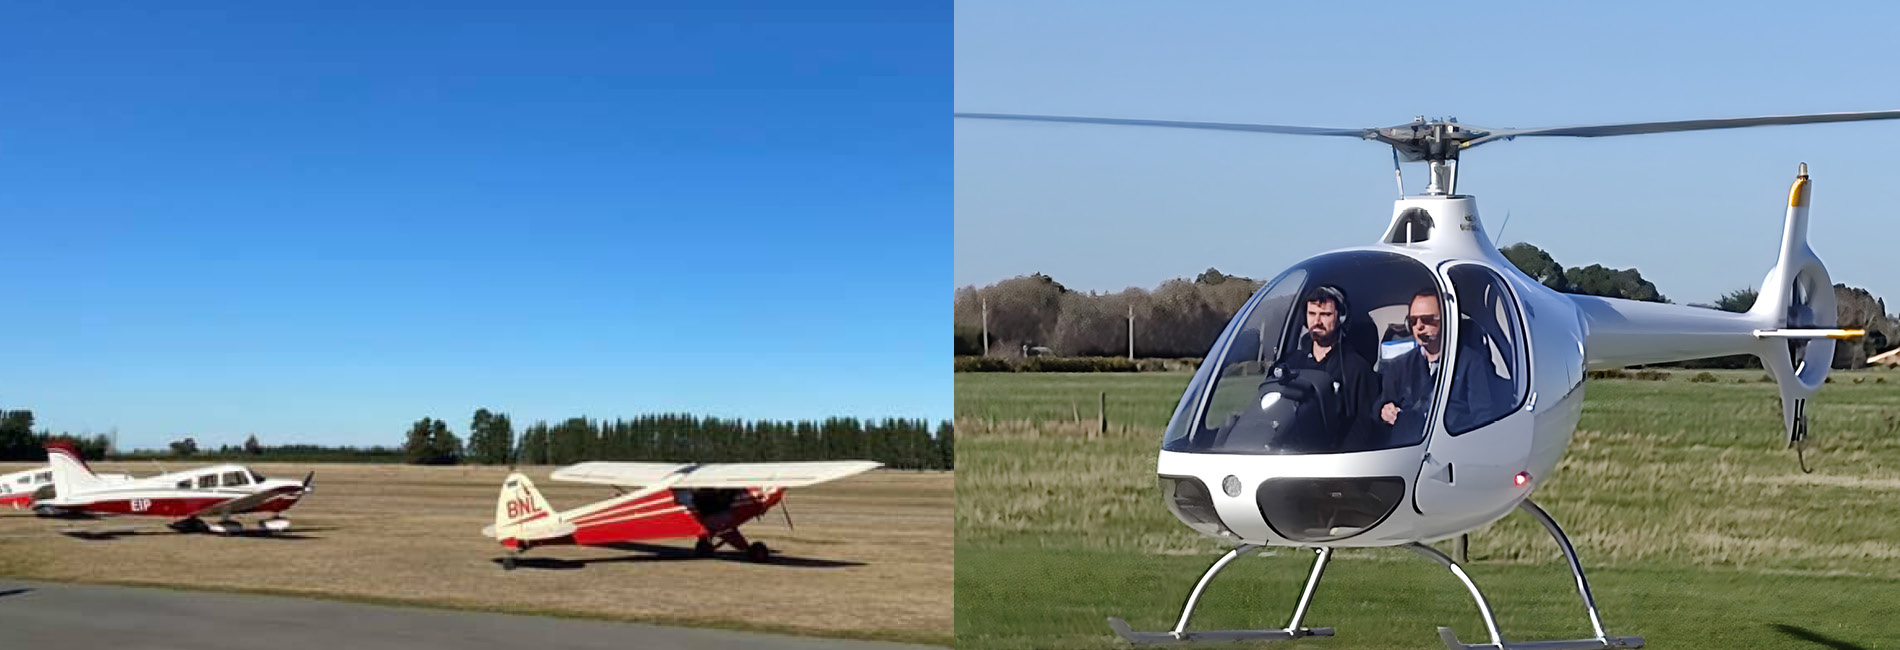 Plane & Helicopter